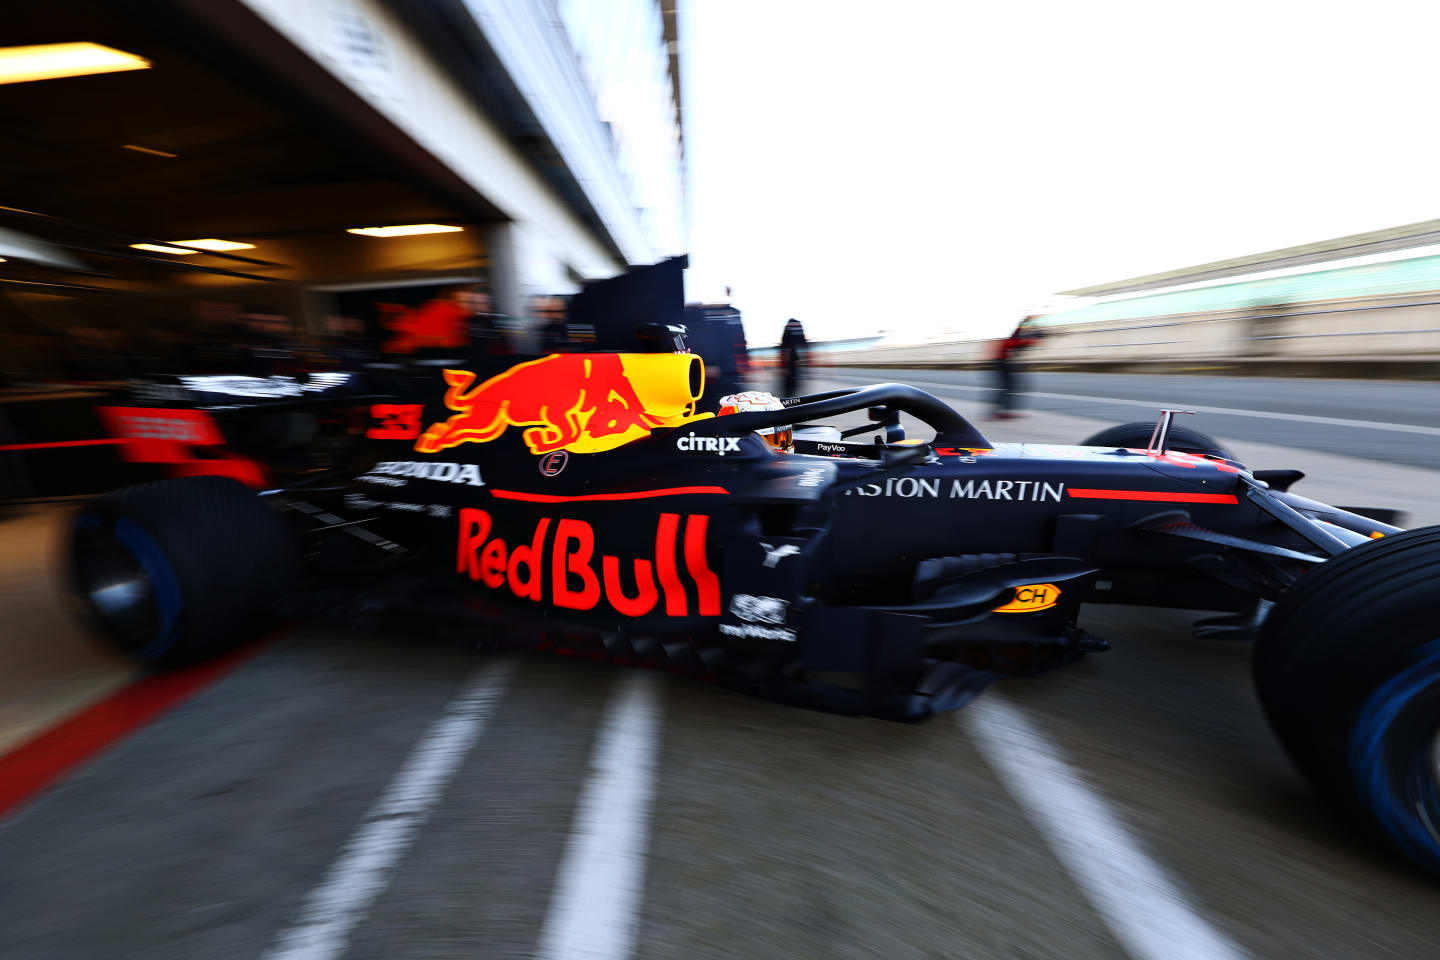 The RB16 leaves the garage